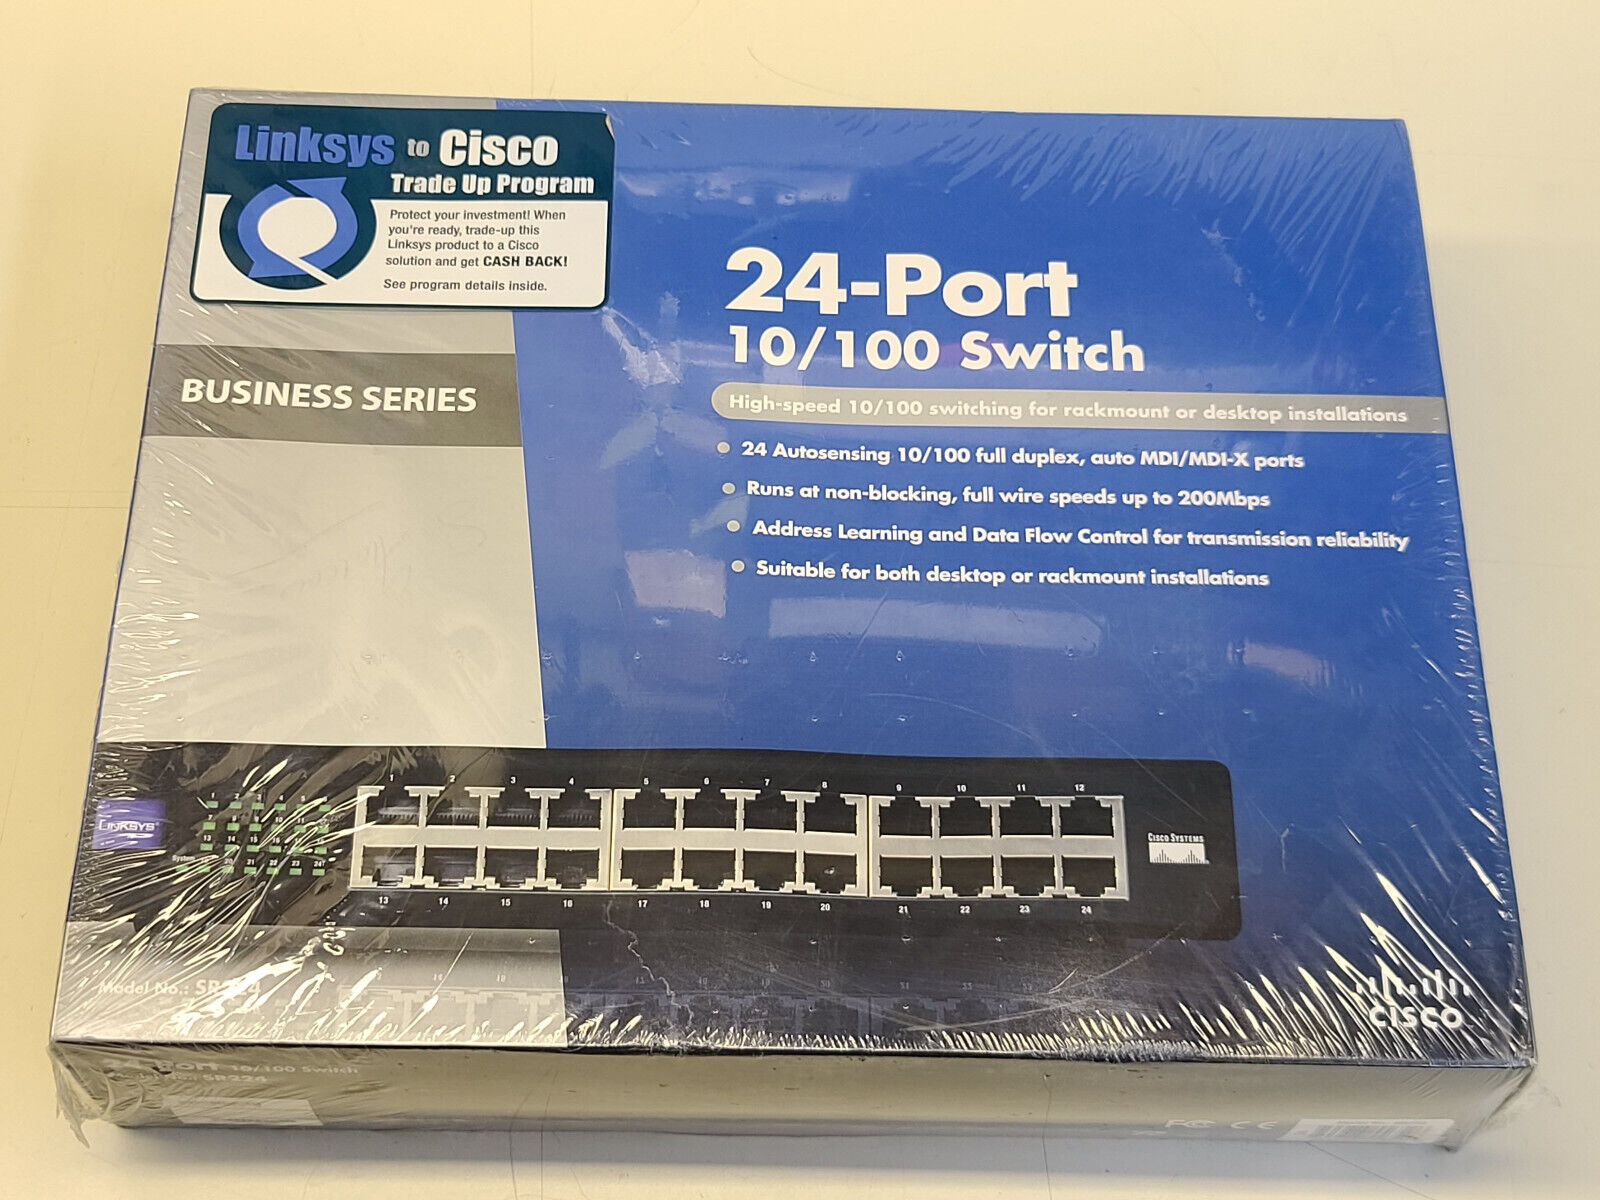 NEW SEALED Cisco/Linksys Business Series SR224 24-Ports 10/100Mbps Switch